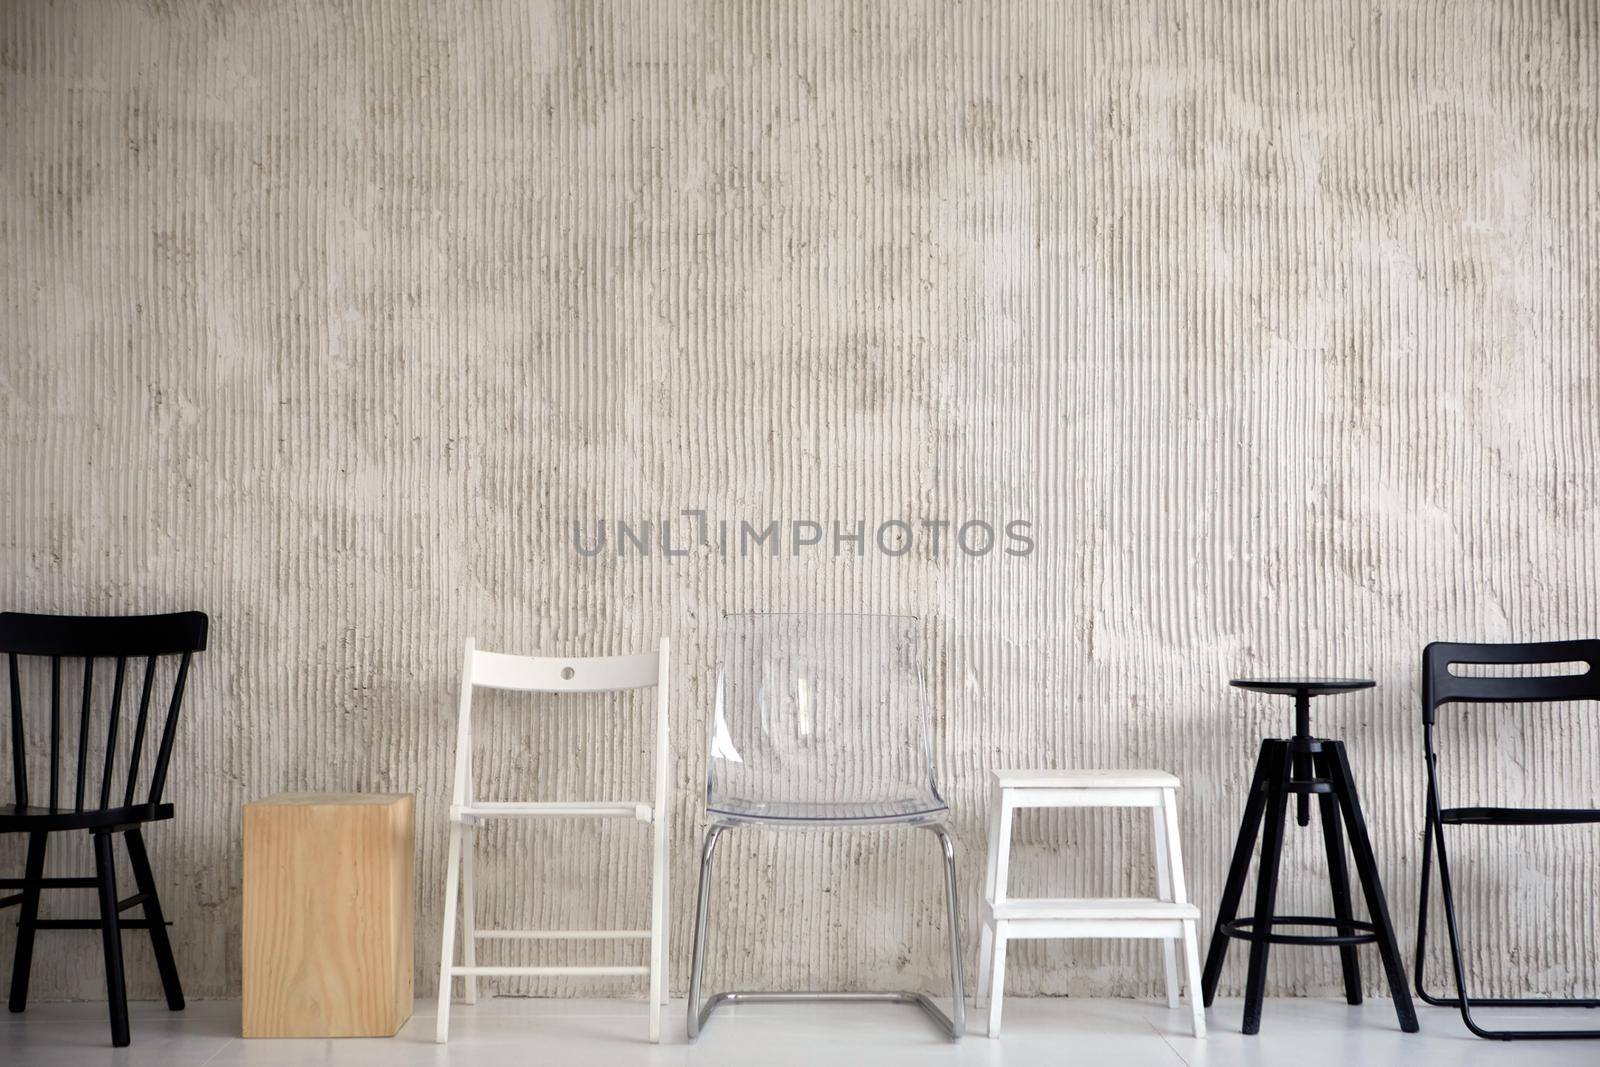 Wooden plastic and metal chairs placed in row near cement wall in studio. Different types configurations and materials of chair